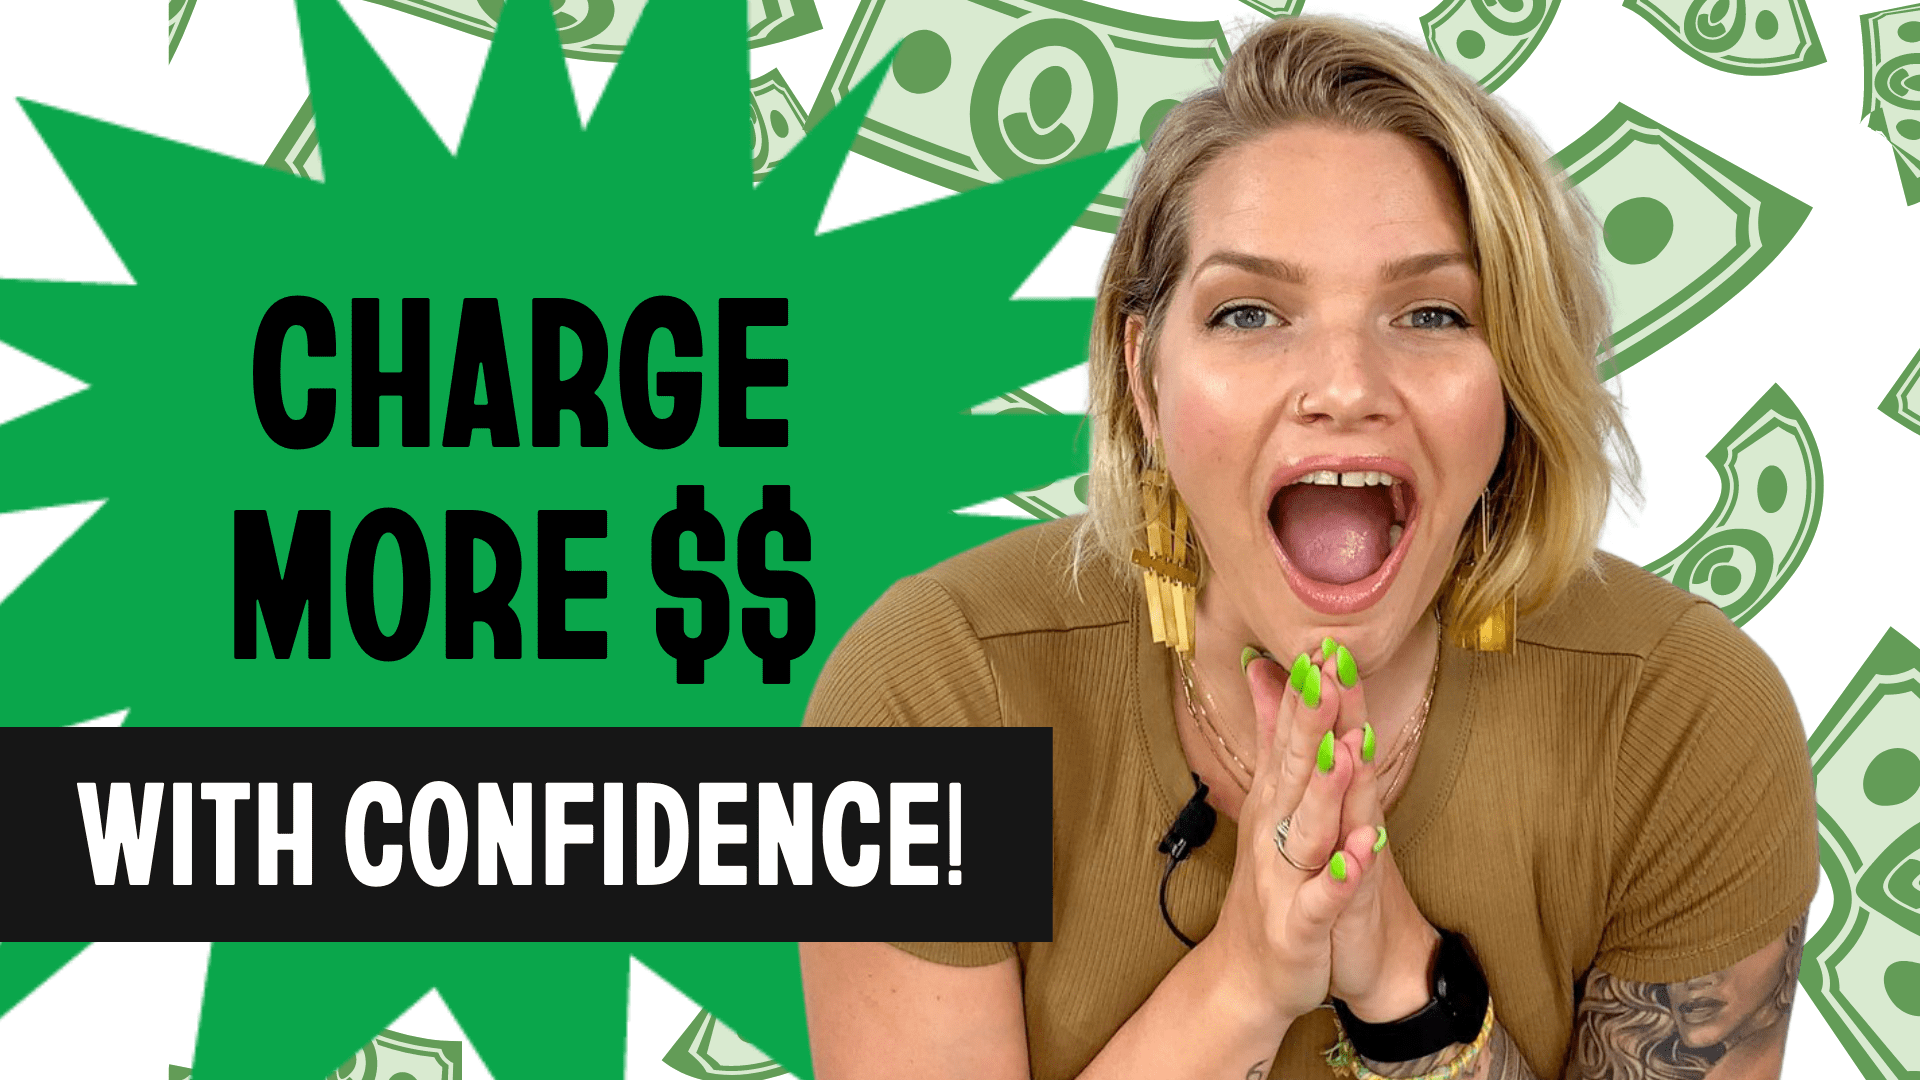 How to raise your prices with confidence